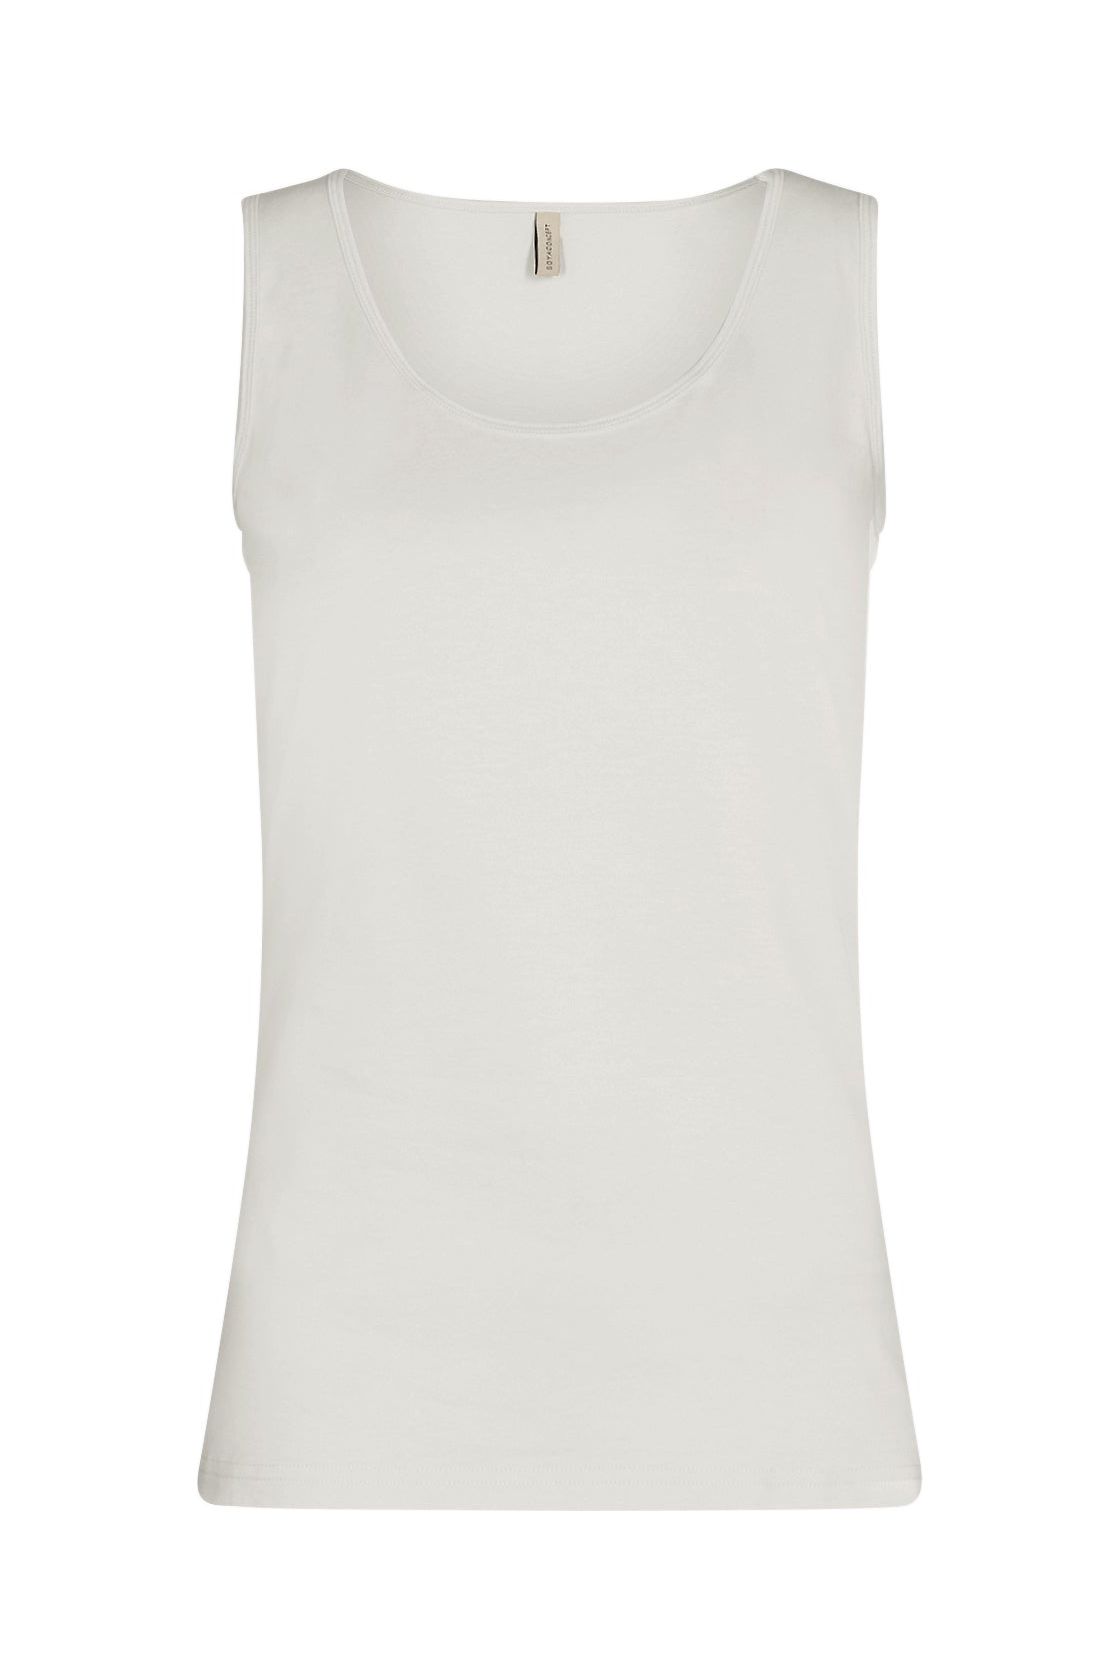 Soya Concept - Ladies Knitted Top - Off White & Rose Cloud - P25111